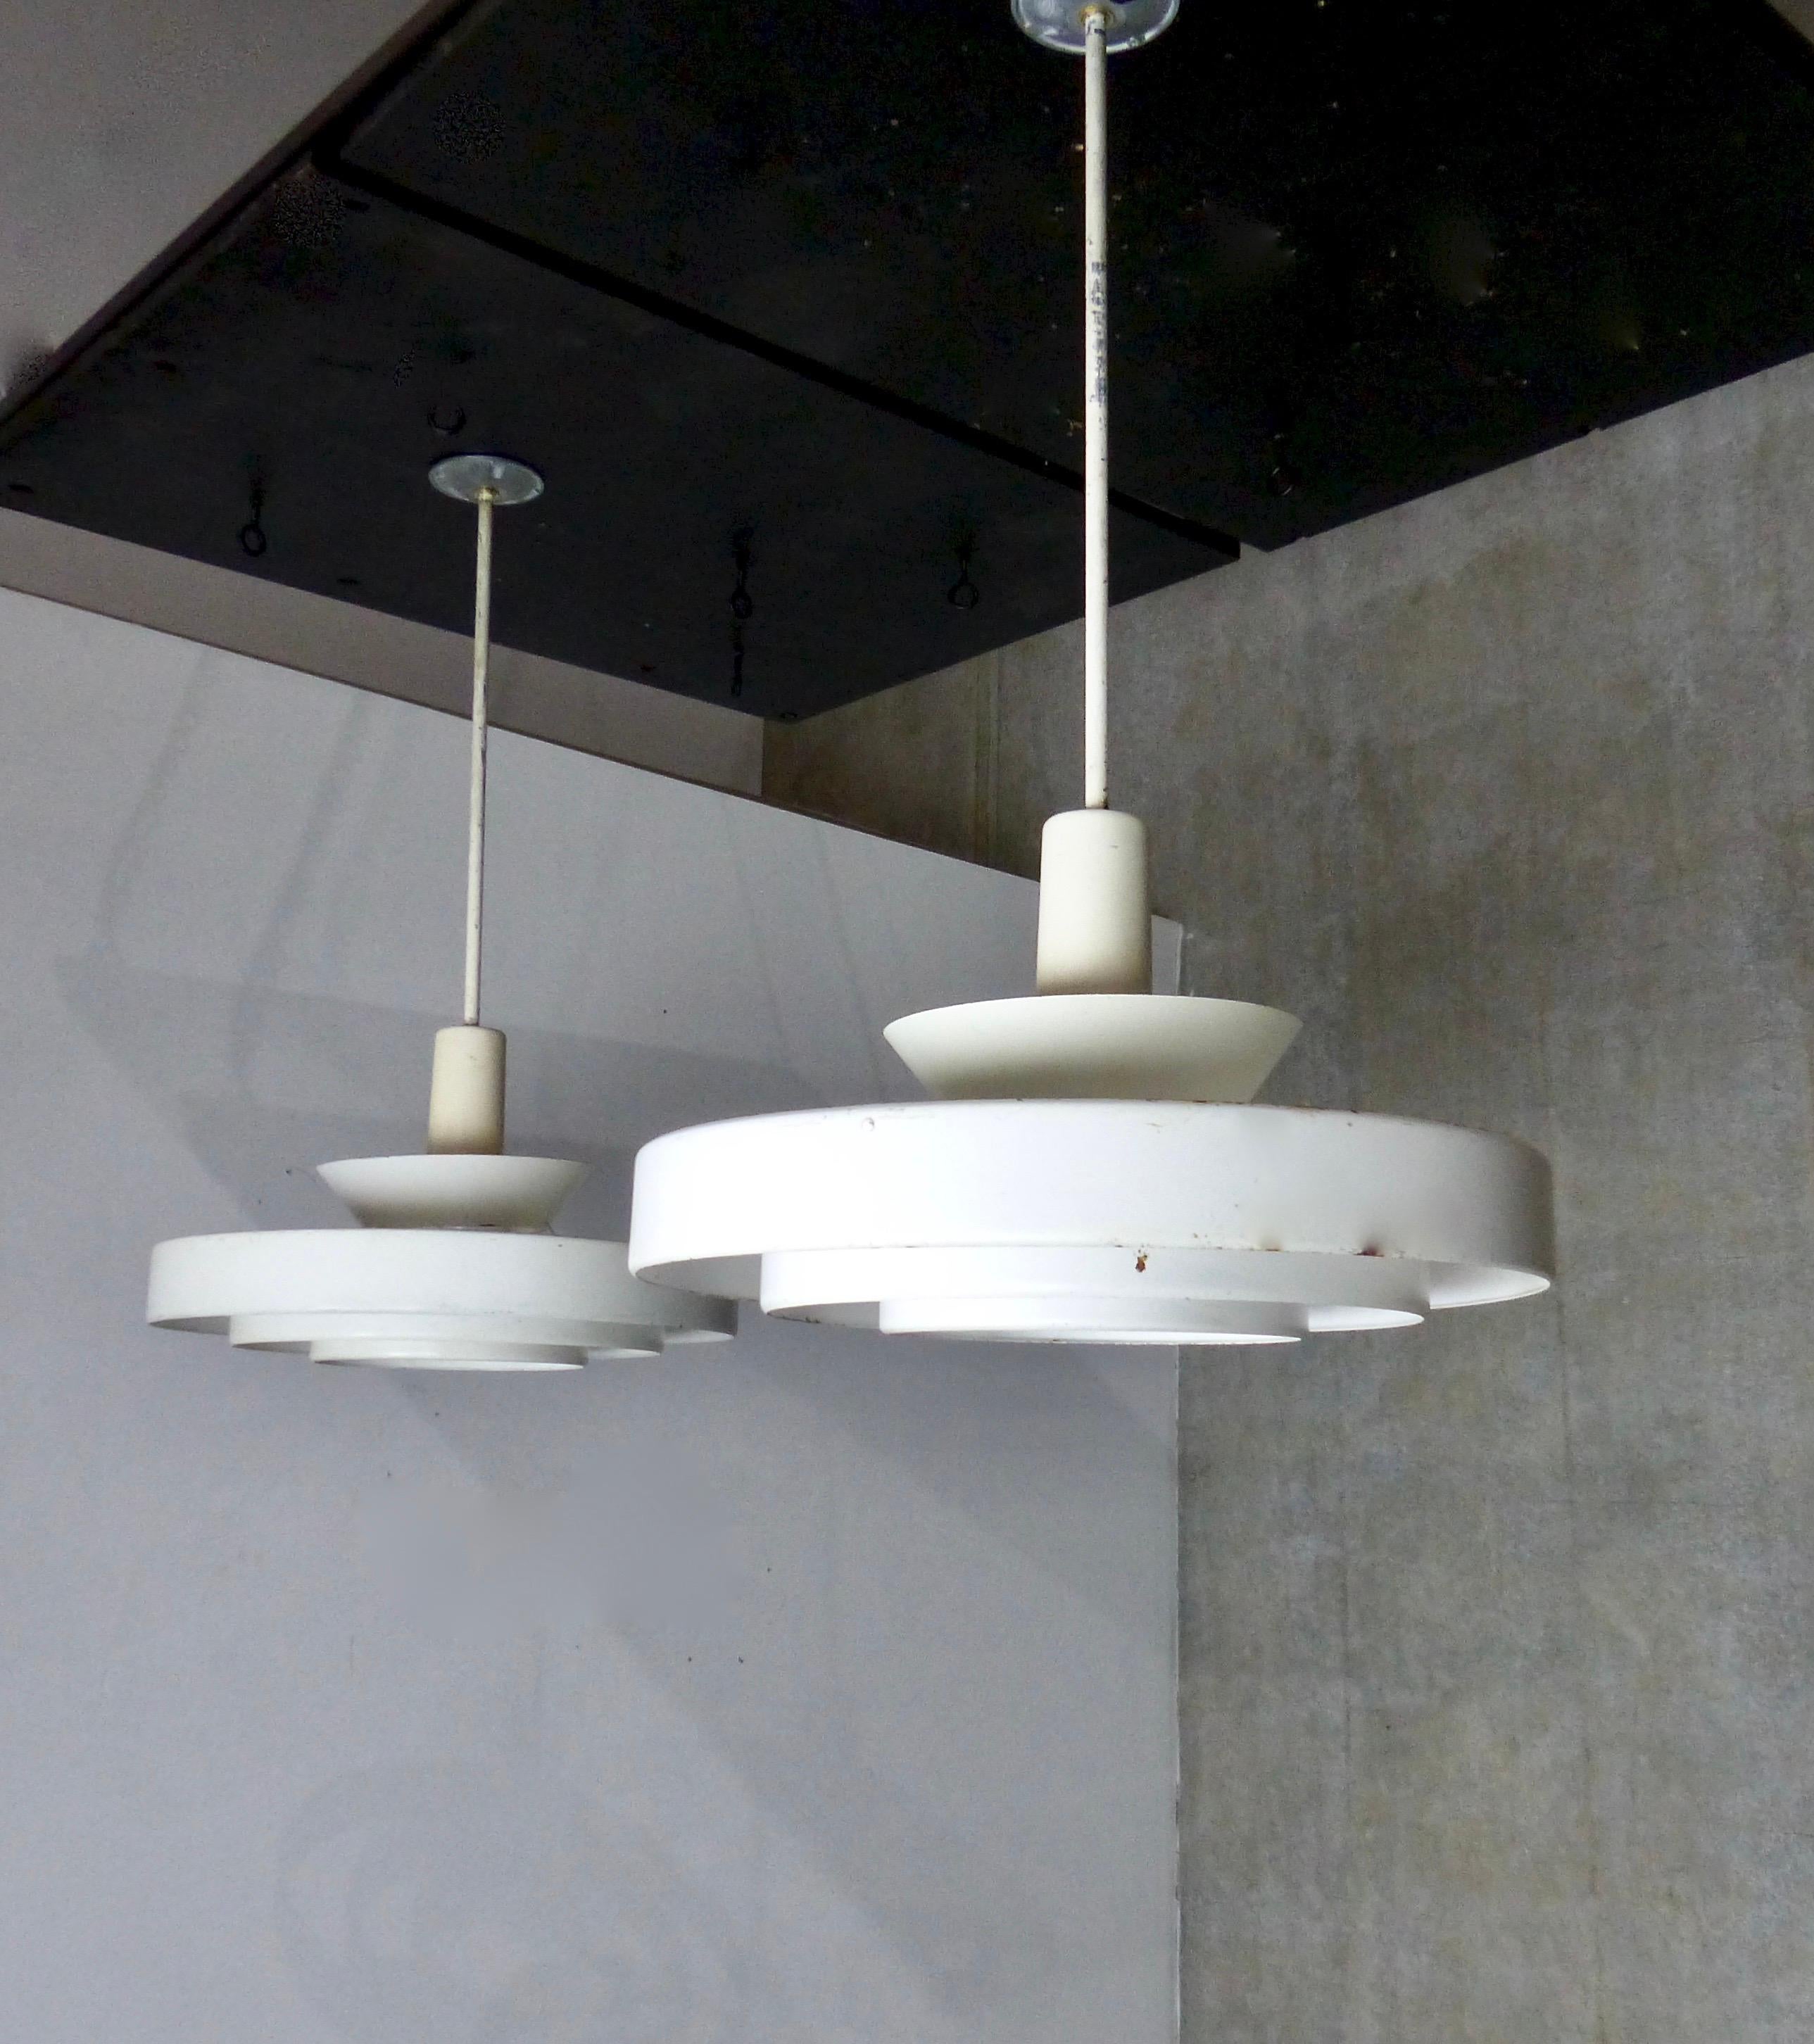 Matched pair of Mid-Century Modern pendant lights by Prescolite. The Minimalist design features three tiers of 'Saturn' style concentric metal rings. Re-wired and CSA approved to current electrical standards; ceiling mounting plate included.